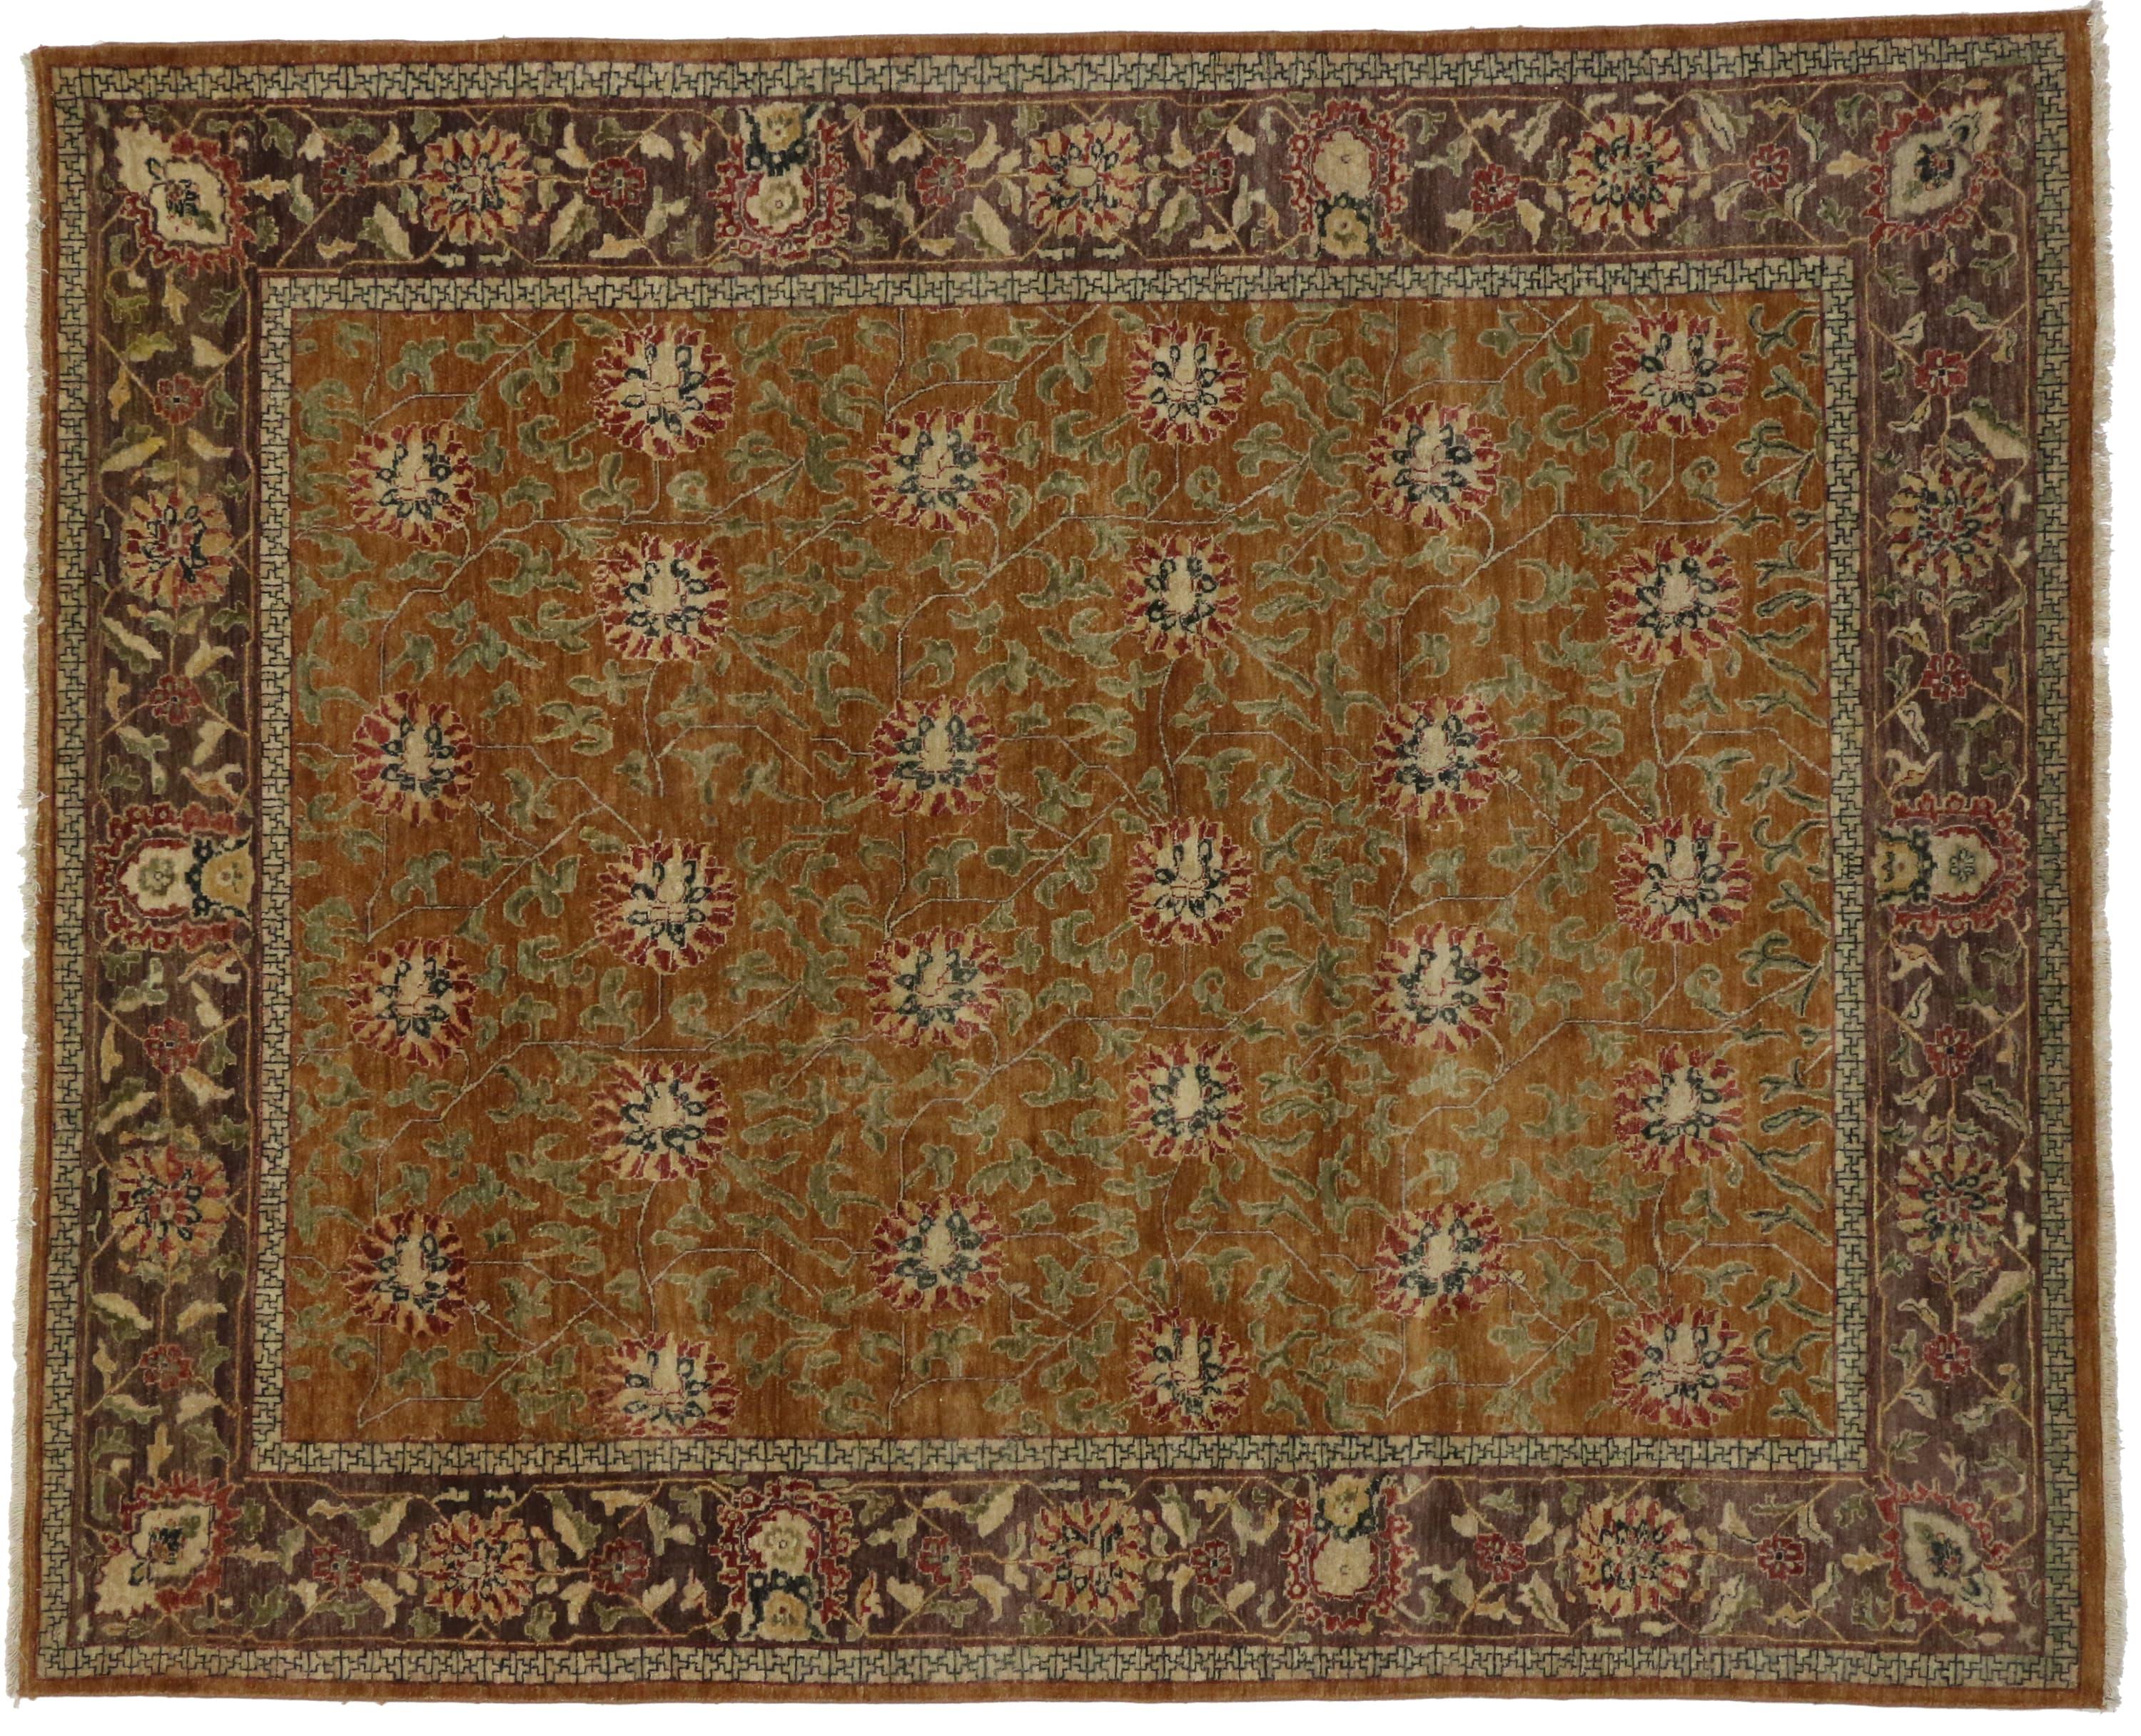 Hand-Knotted New Contemporary Indian Area Rug with Rustic Arts and Crafts Style